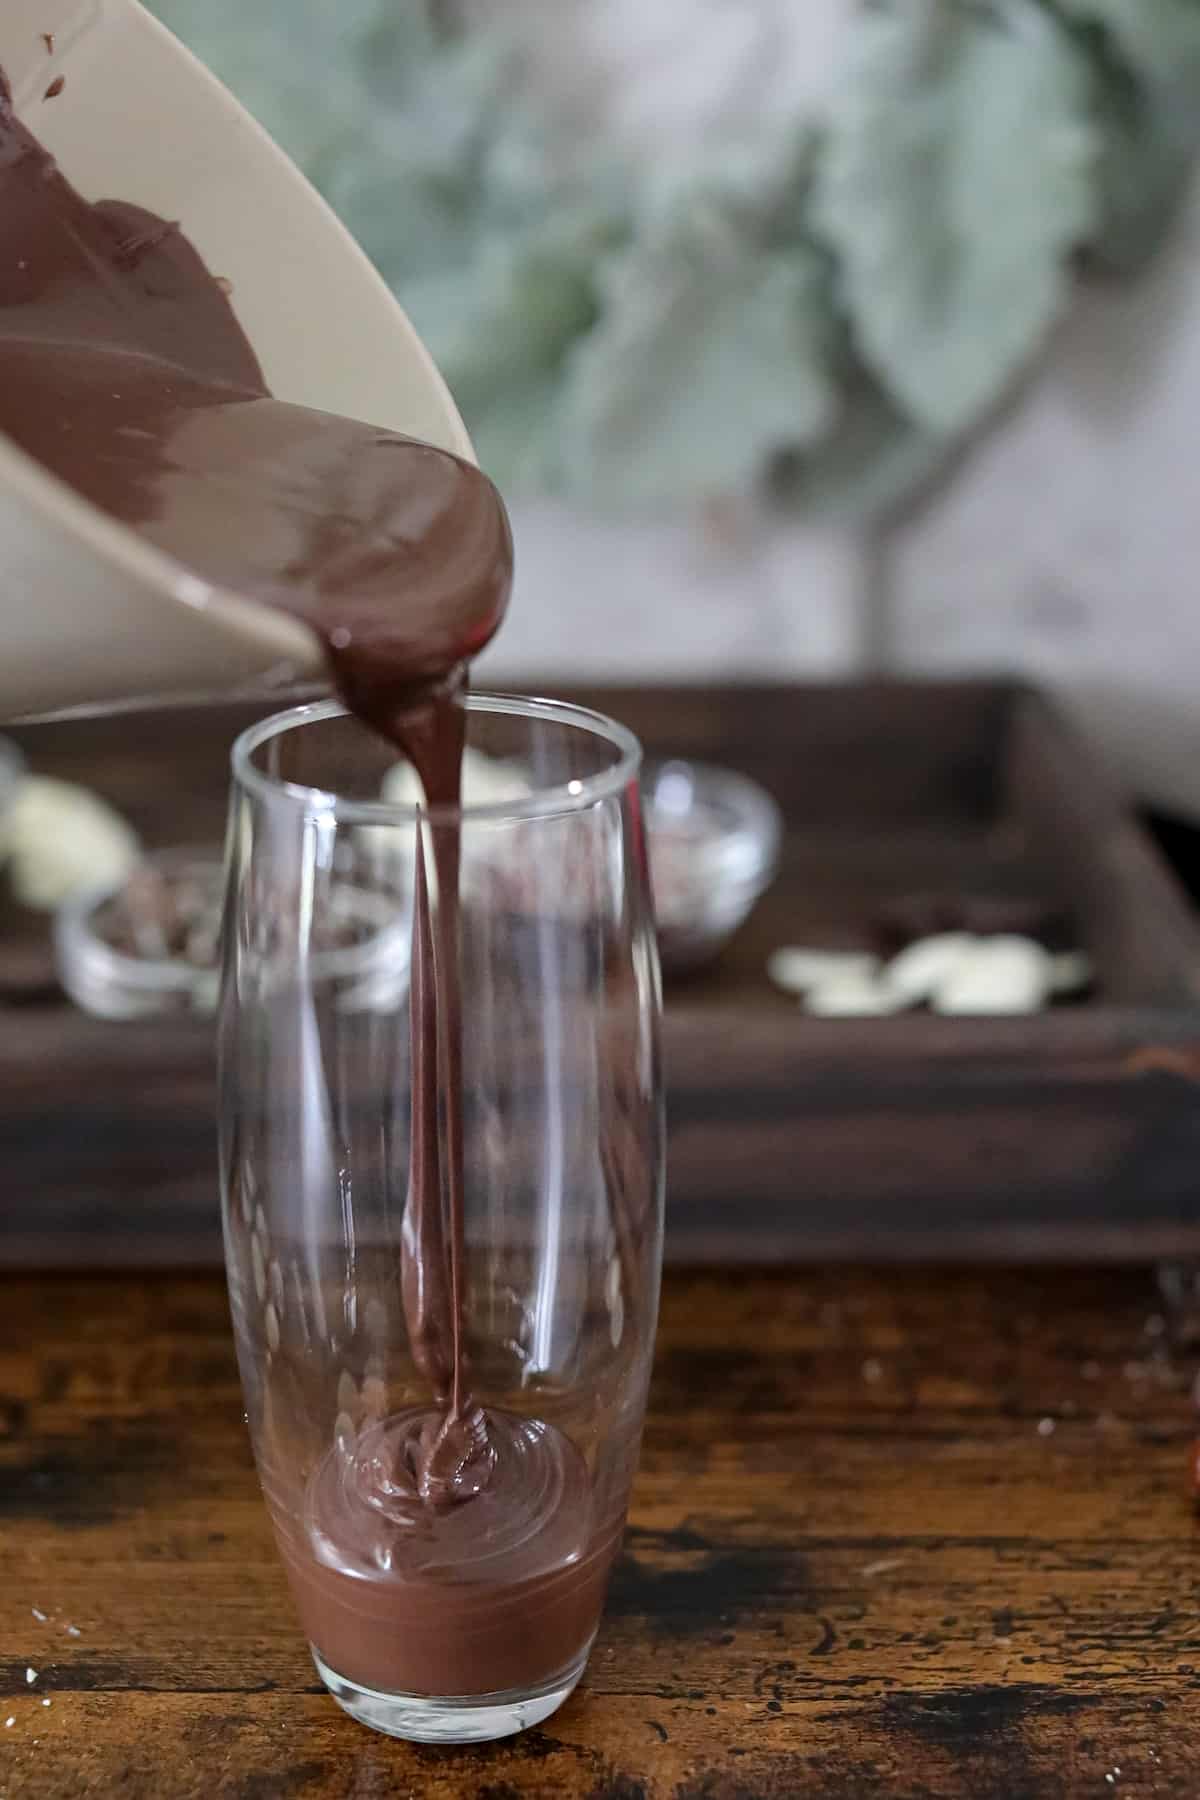 Pouring chocolate into a glass.